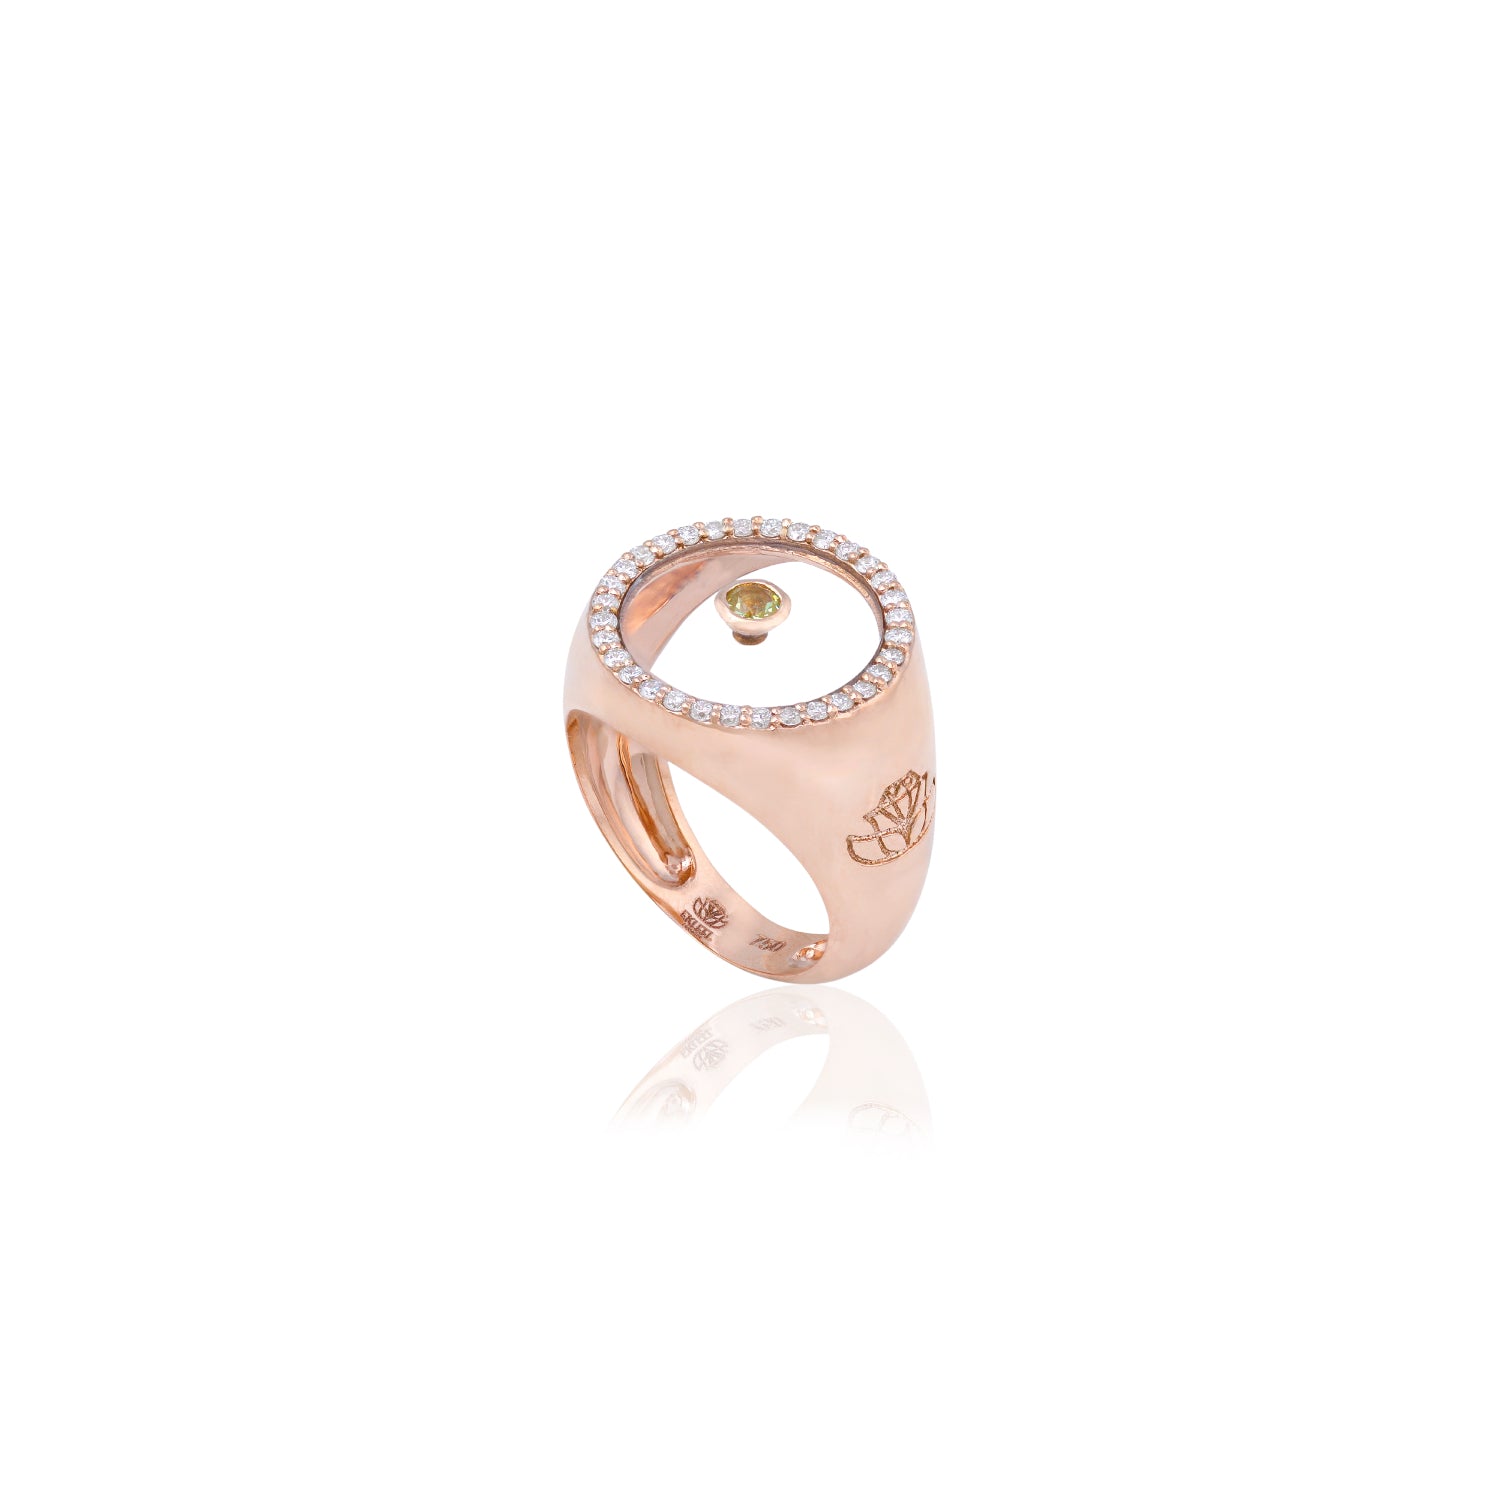 Peridot August Birthstone Ring in Rose Gold